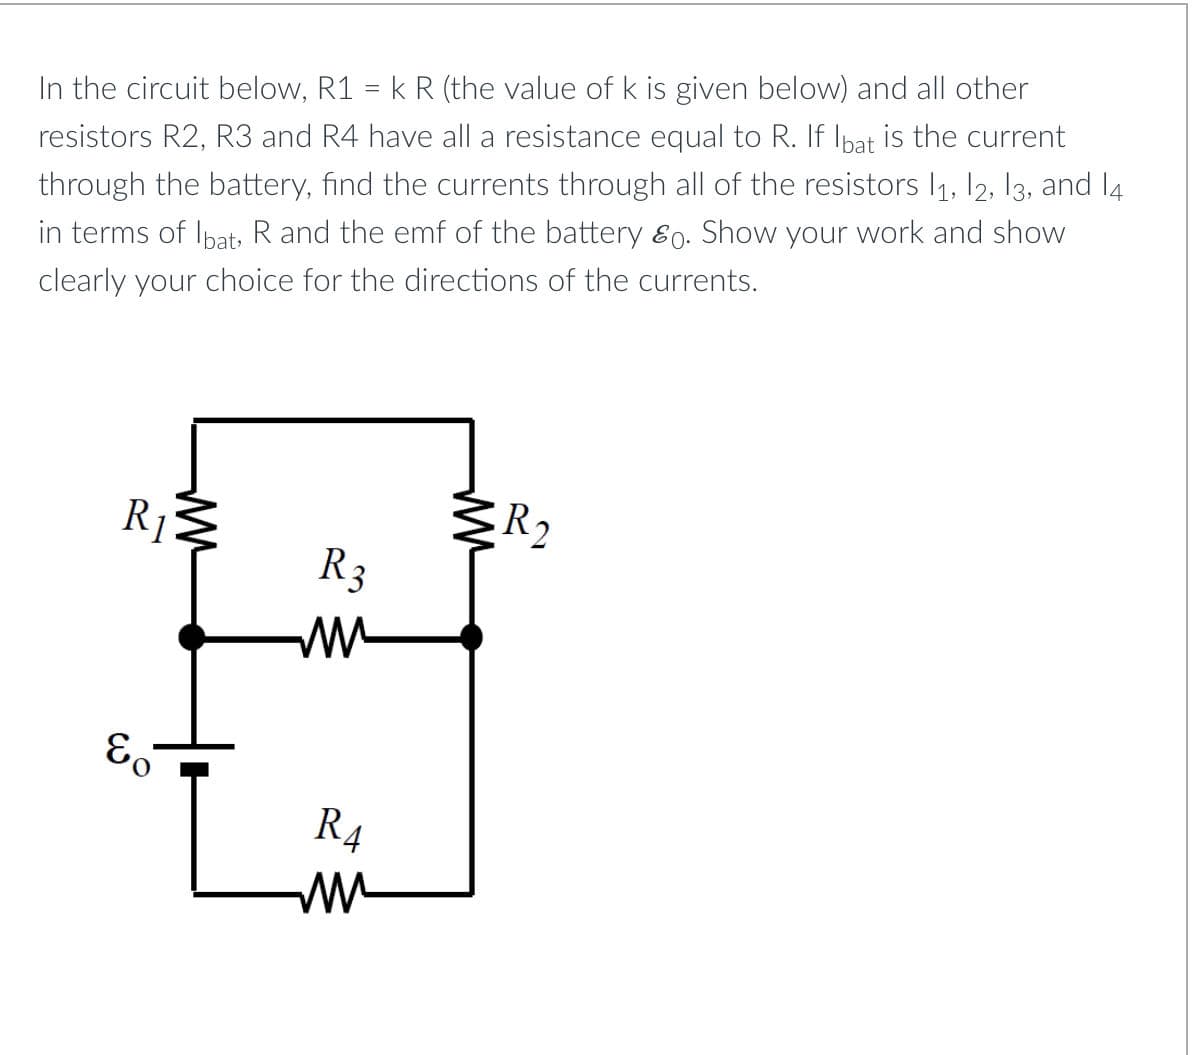 In the circuit below, R1 = k R (the value of k is given below) and all other
resistors R2, R3 and R4 have all a resistance equal to R. If Ibat is the current
through the battery, find the currents through all of the resistors 1₁, 12, 13, and 14
in terms of Ibat, R and the emf of the battery &0. Show your work and show
clearly your choice for the directions of the currents.
R₁
&o
ww
R3
R₁
ww
ww
R2